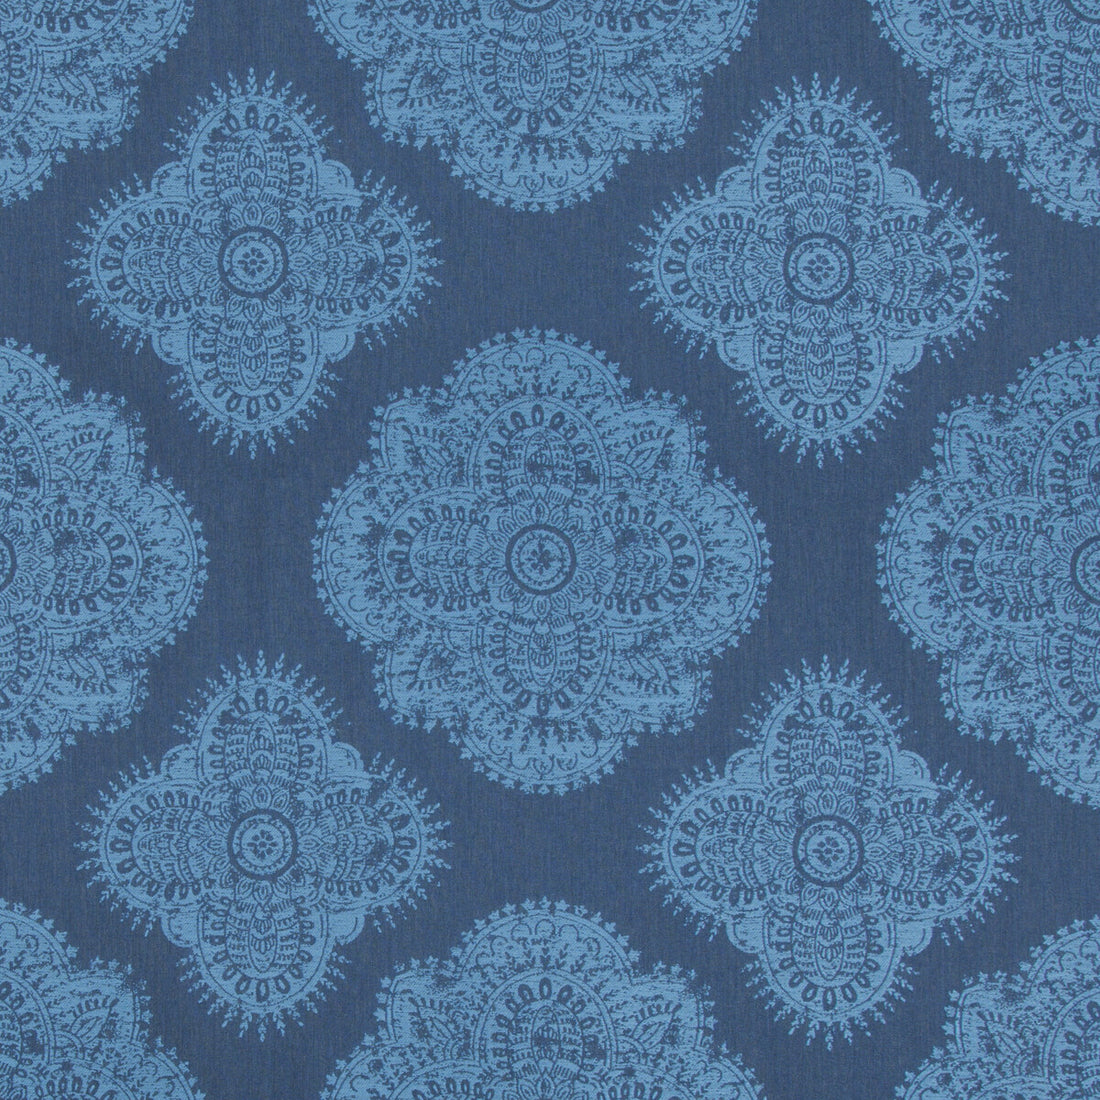 Bendi fabric in indigo color - pattern 34542.50.0 - by Kravet Design in the Echo Indoor Outdoor Ibiza collection